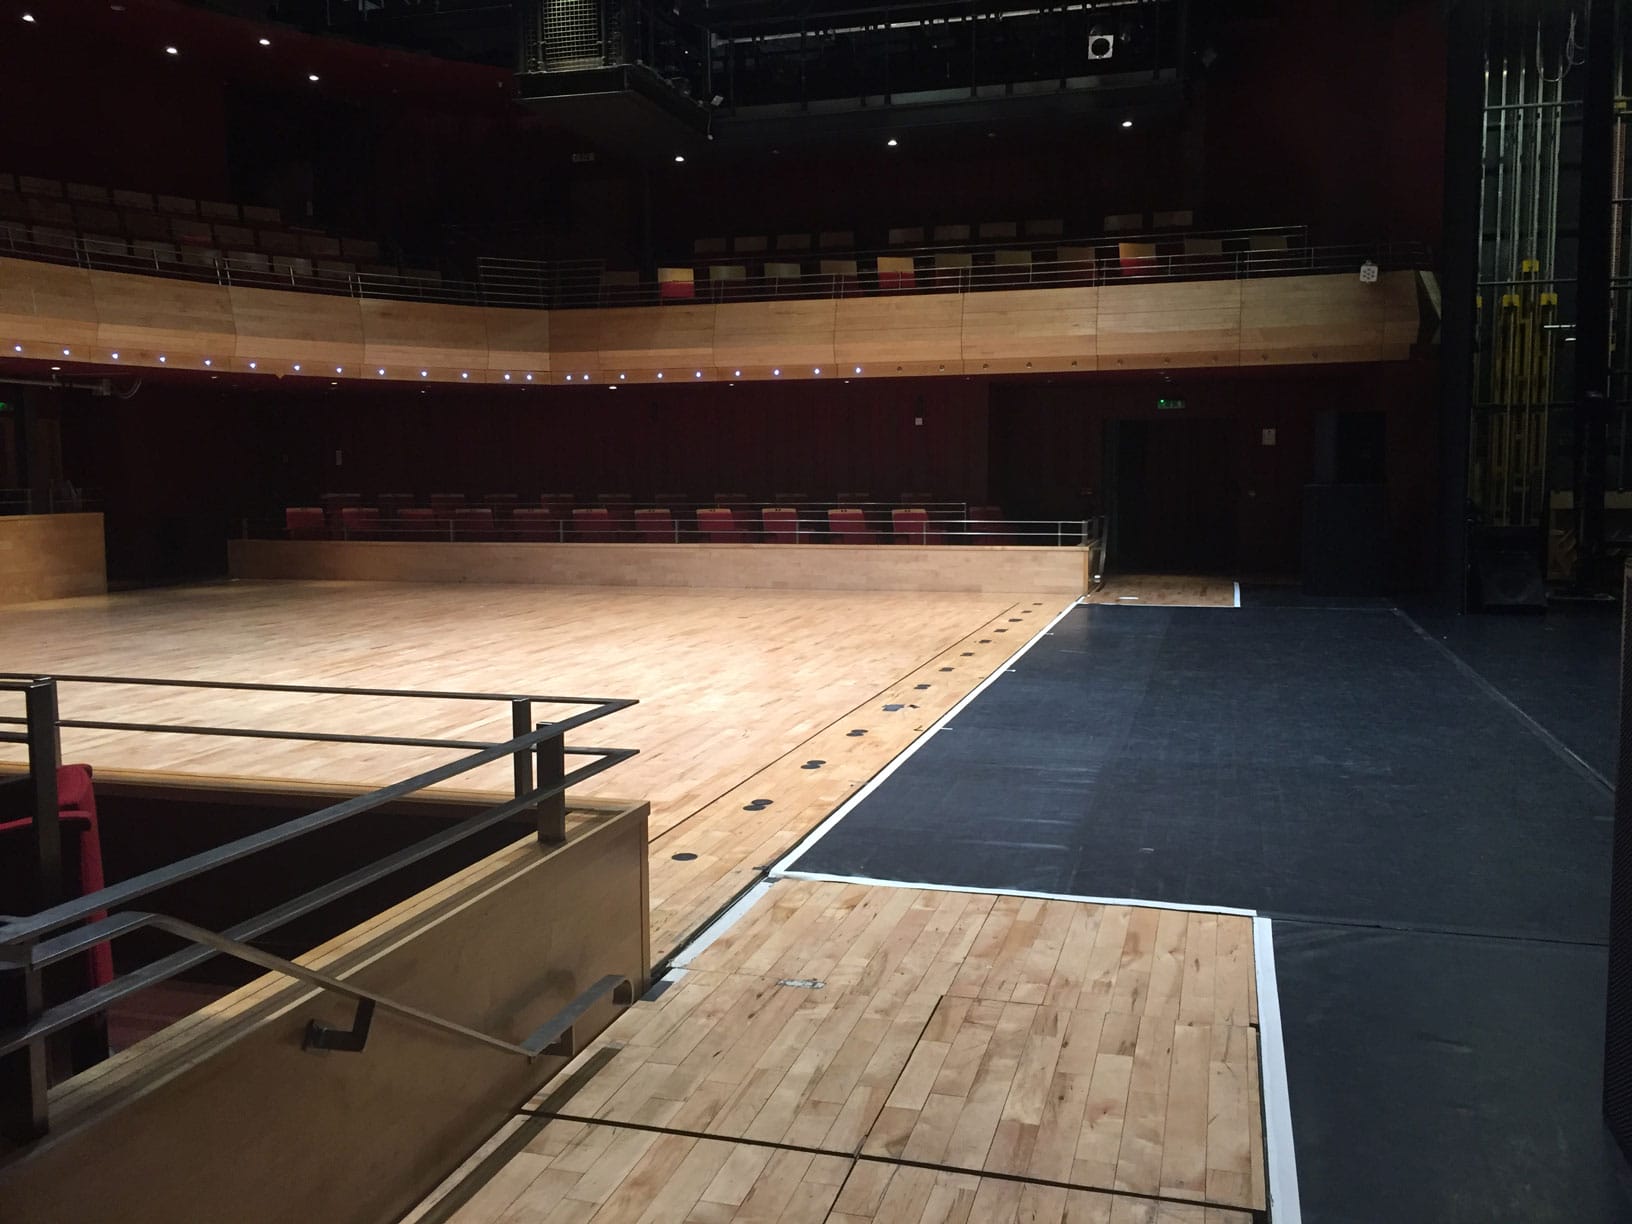 The Pentland Theatre in flat floor mode, taken from next to the stage - a large wooden floor with red theatre seats visible on two levels. On the right of the image is the black floor of the stage.